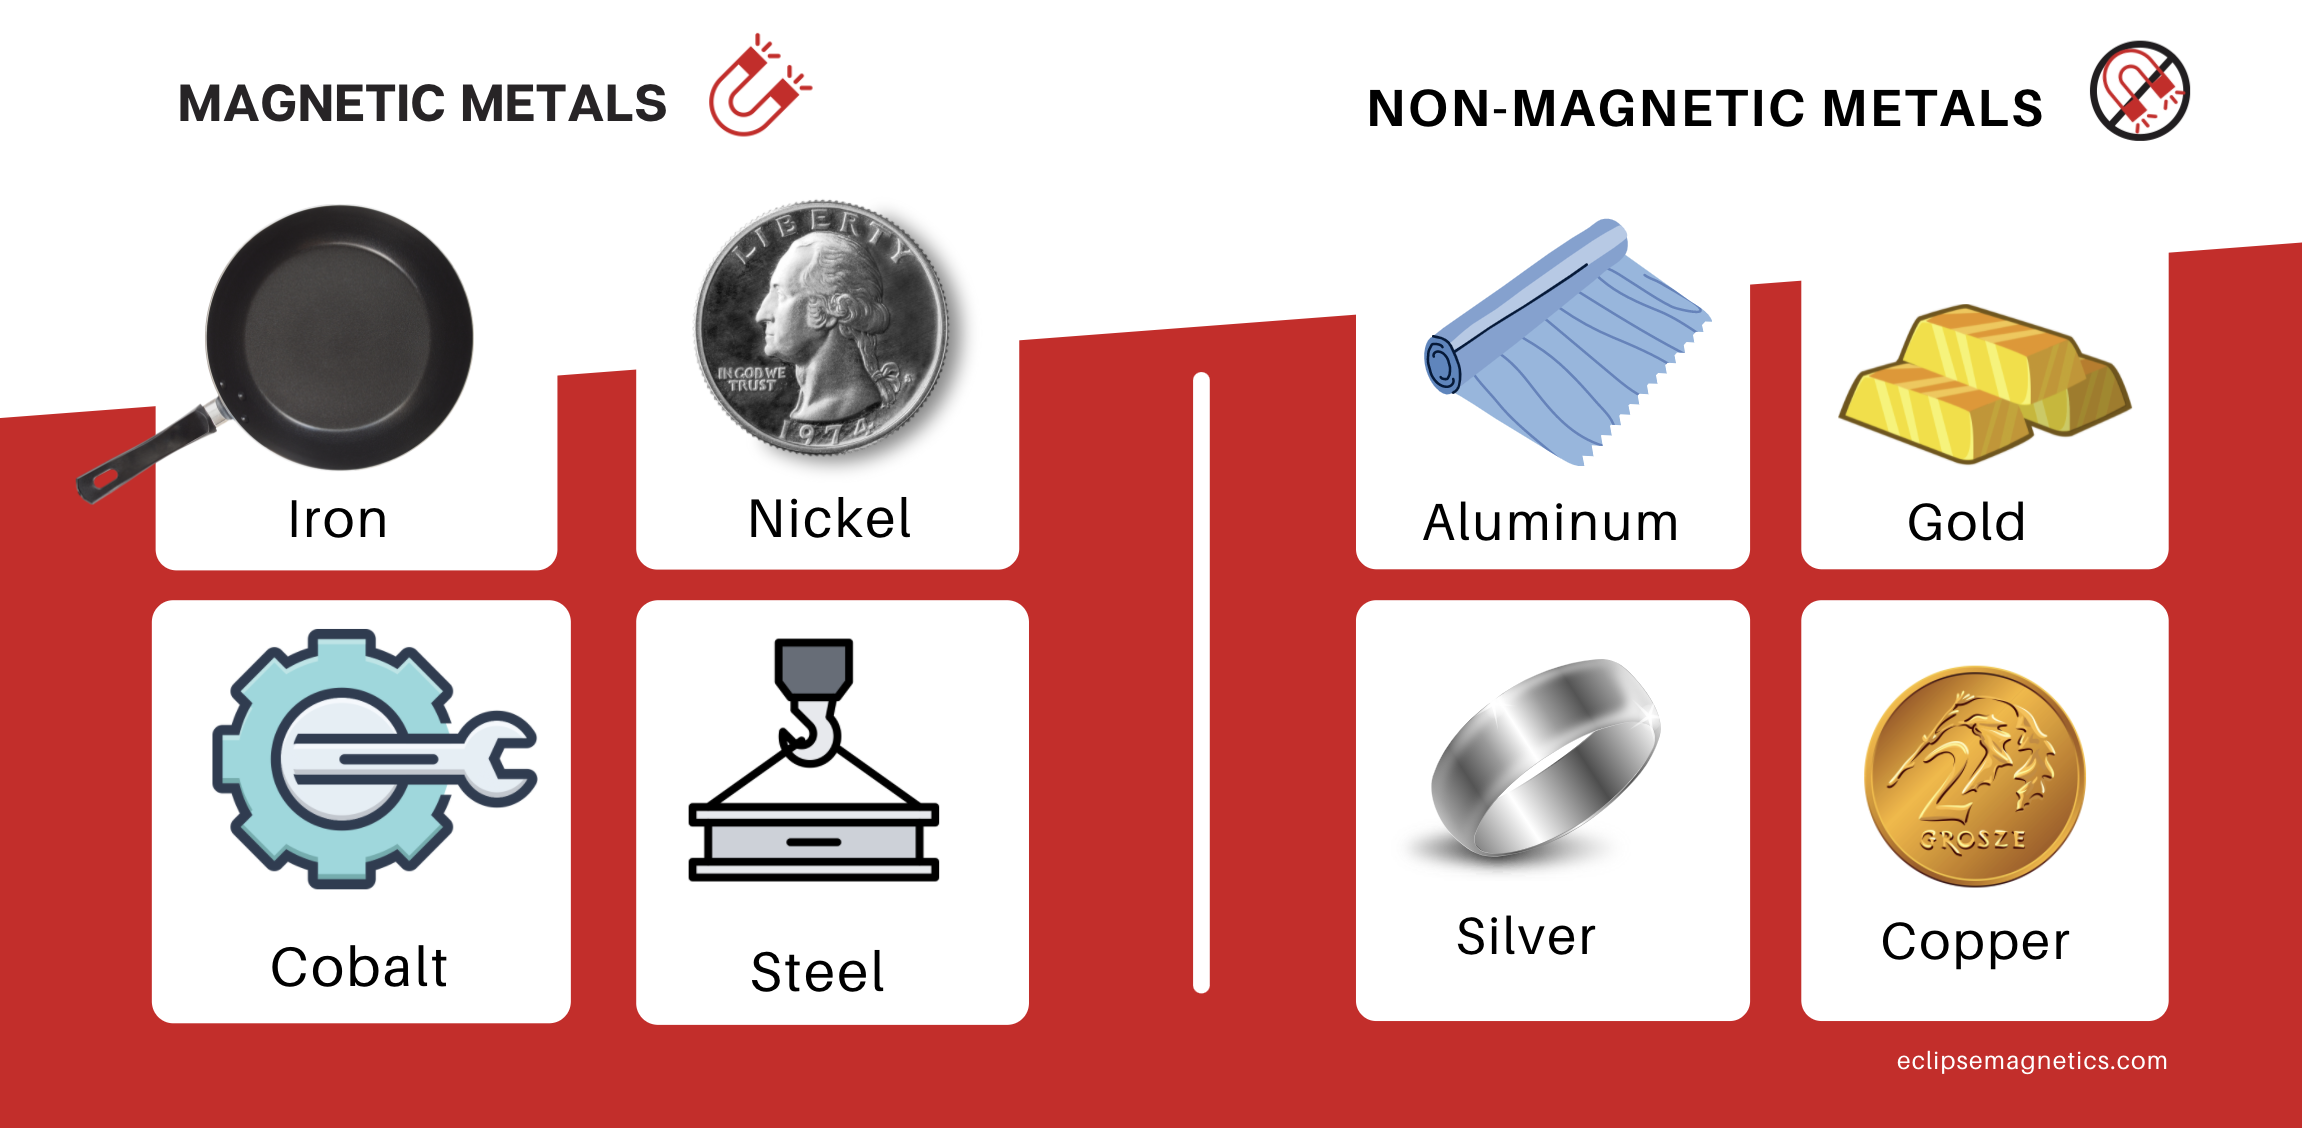 Does a magnet attract only iron ?